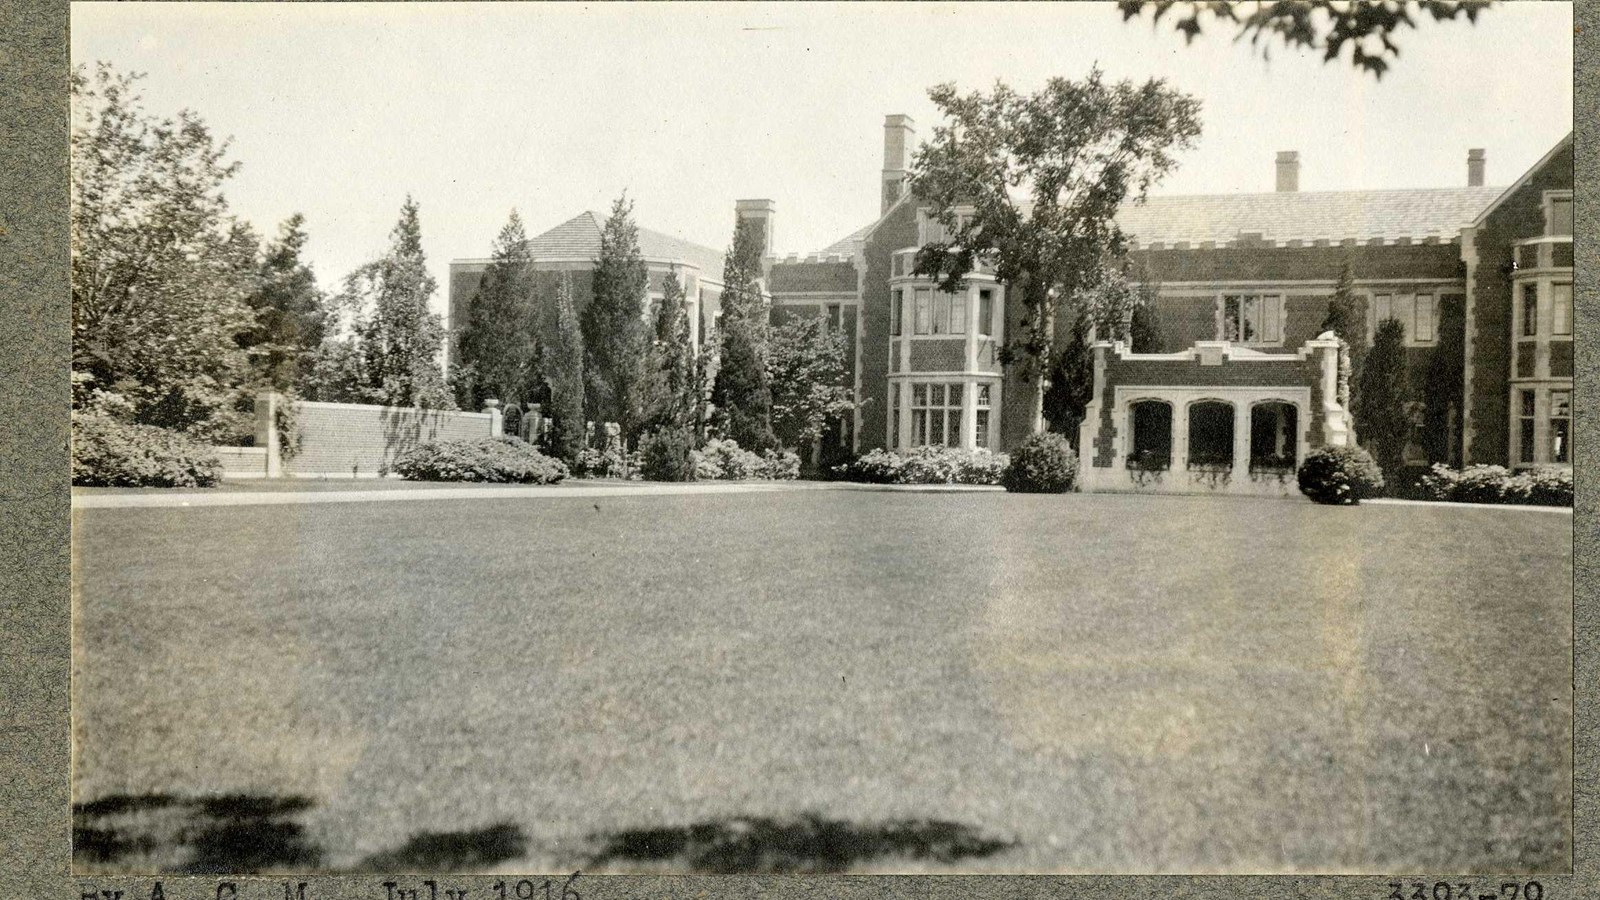 Black and white of flat grassy area in front of large brick house with trees and shrubs around it 